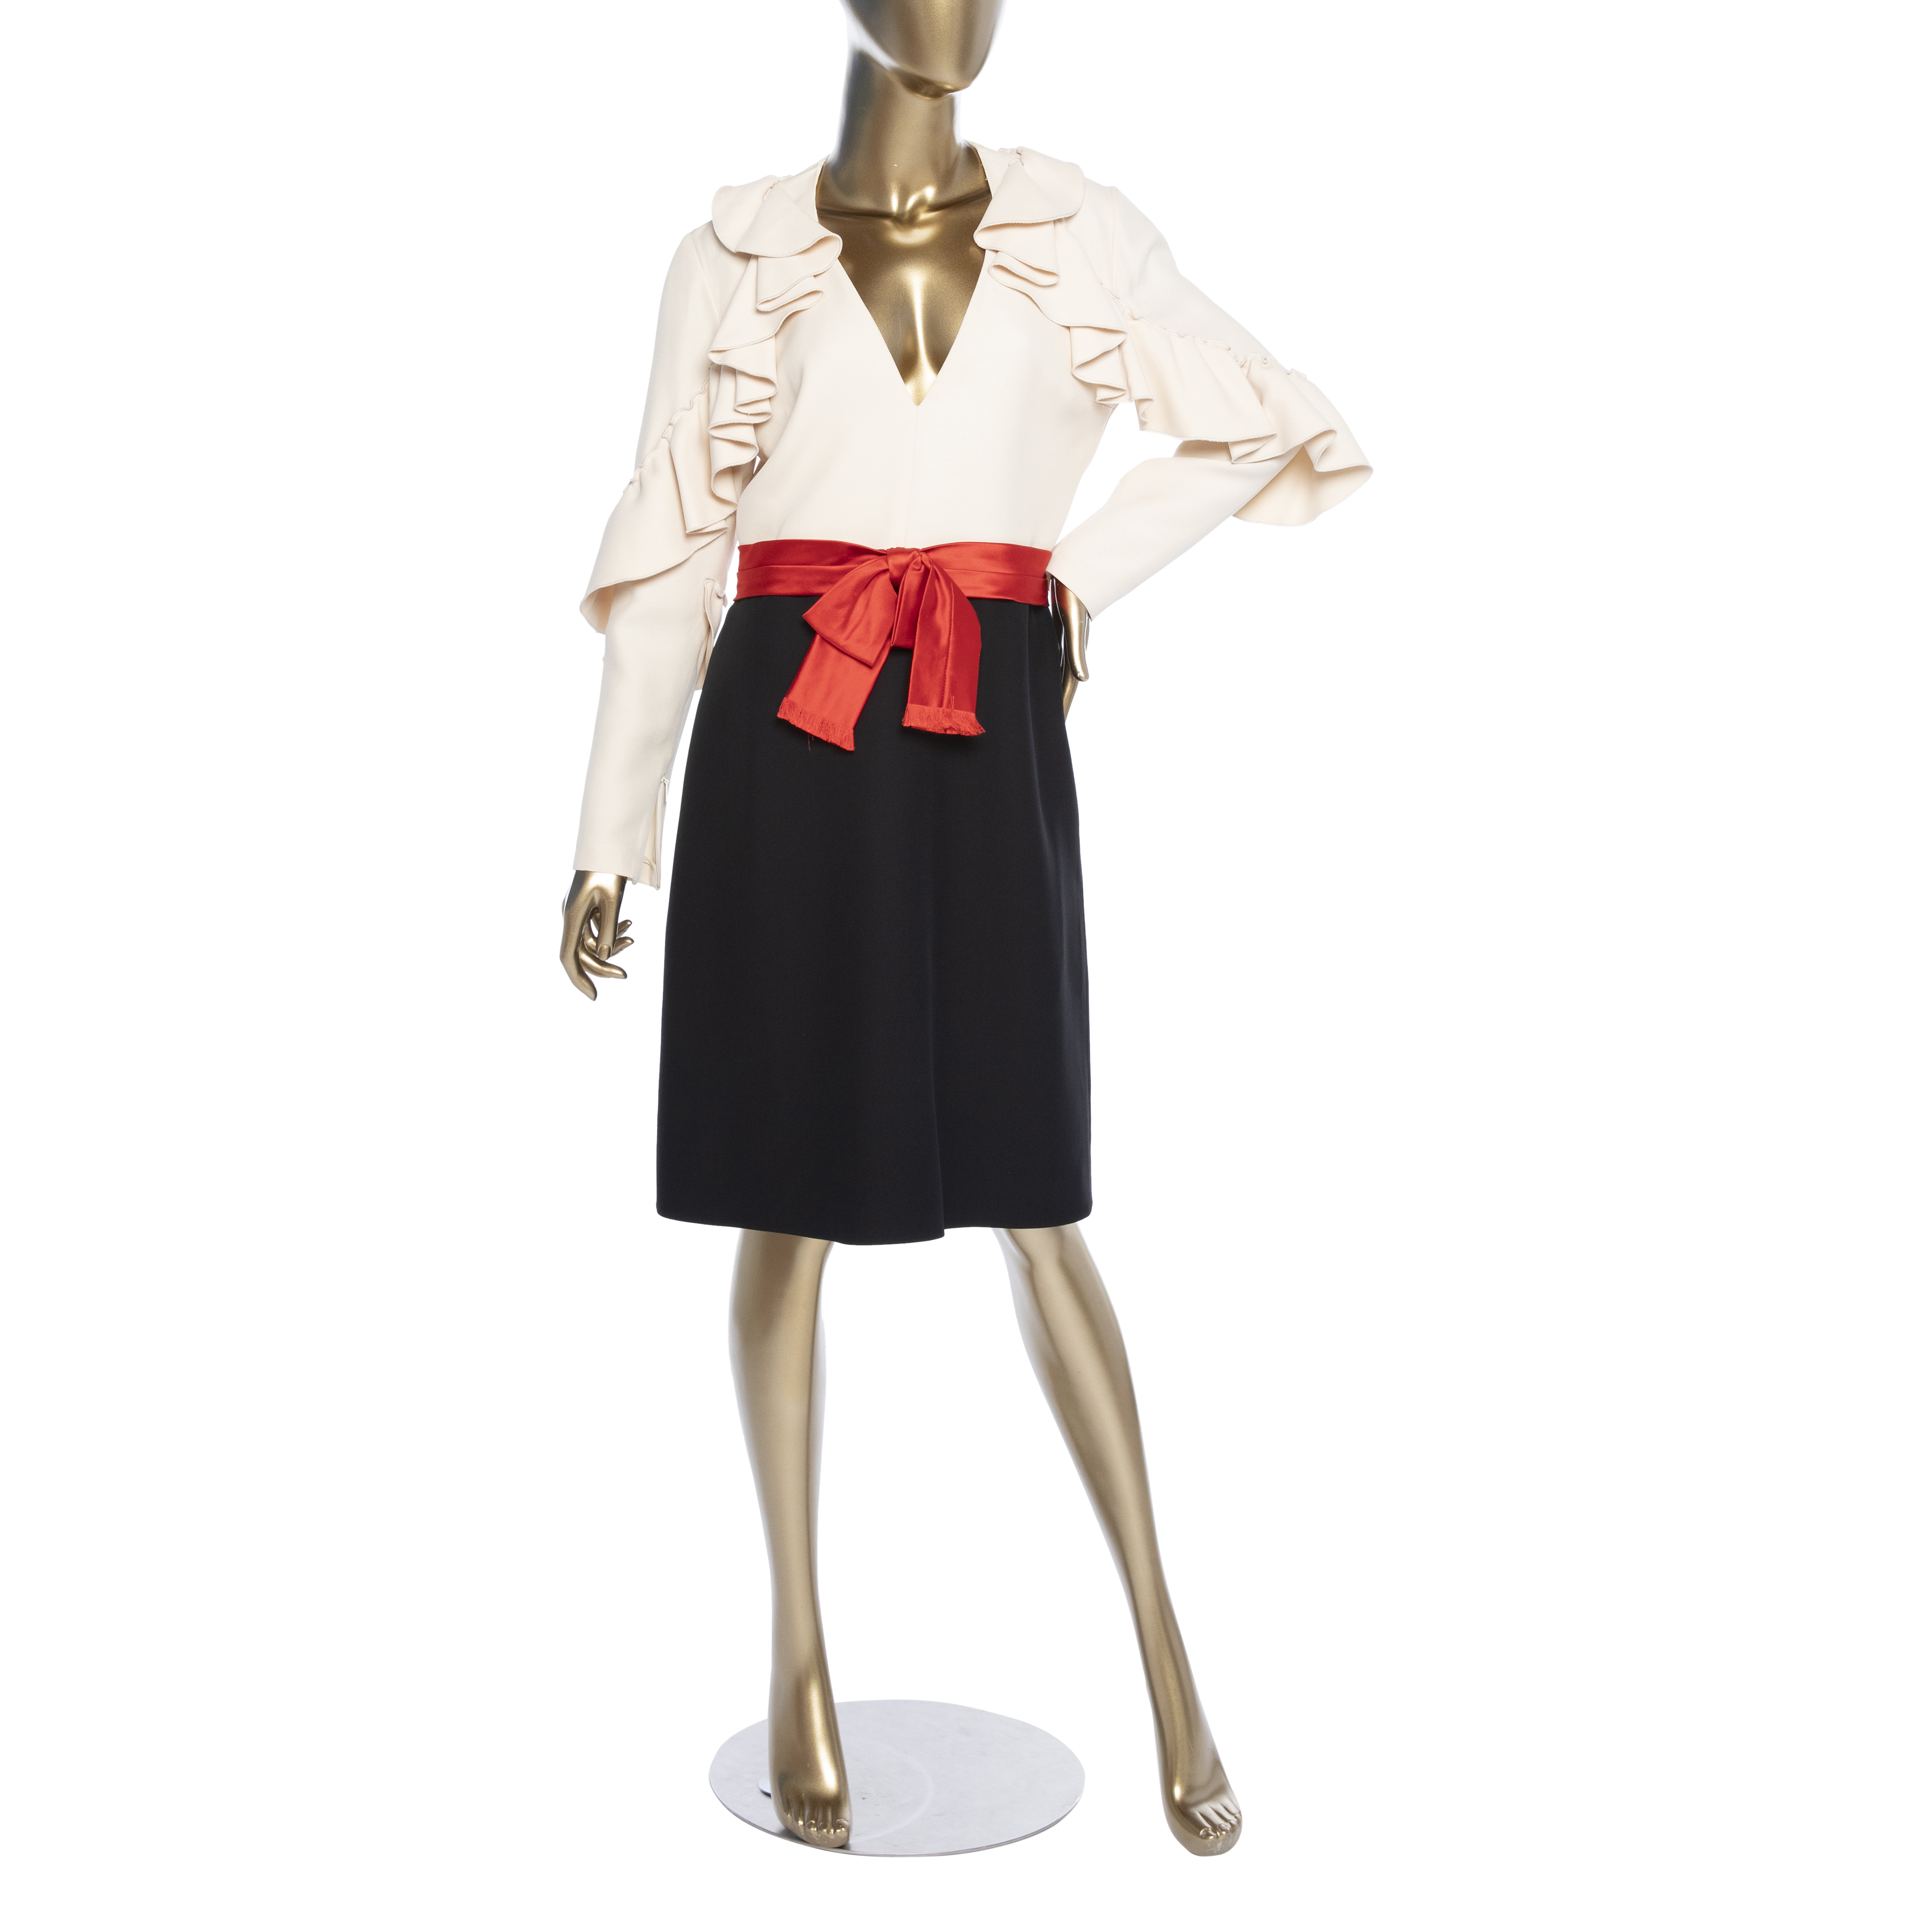 Gucci Wool Dress with Bow Detail - Janet Mandell